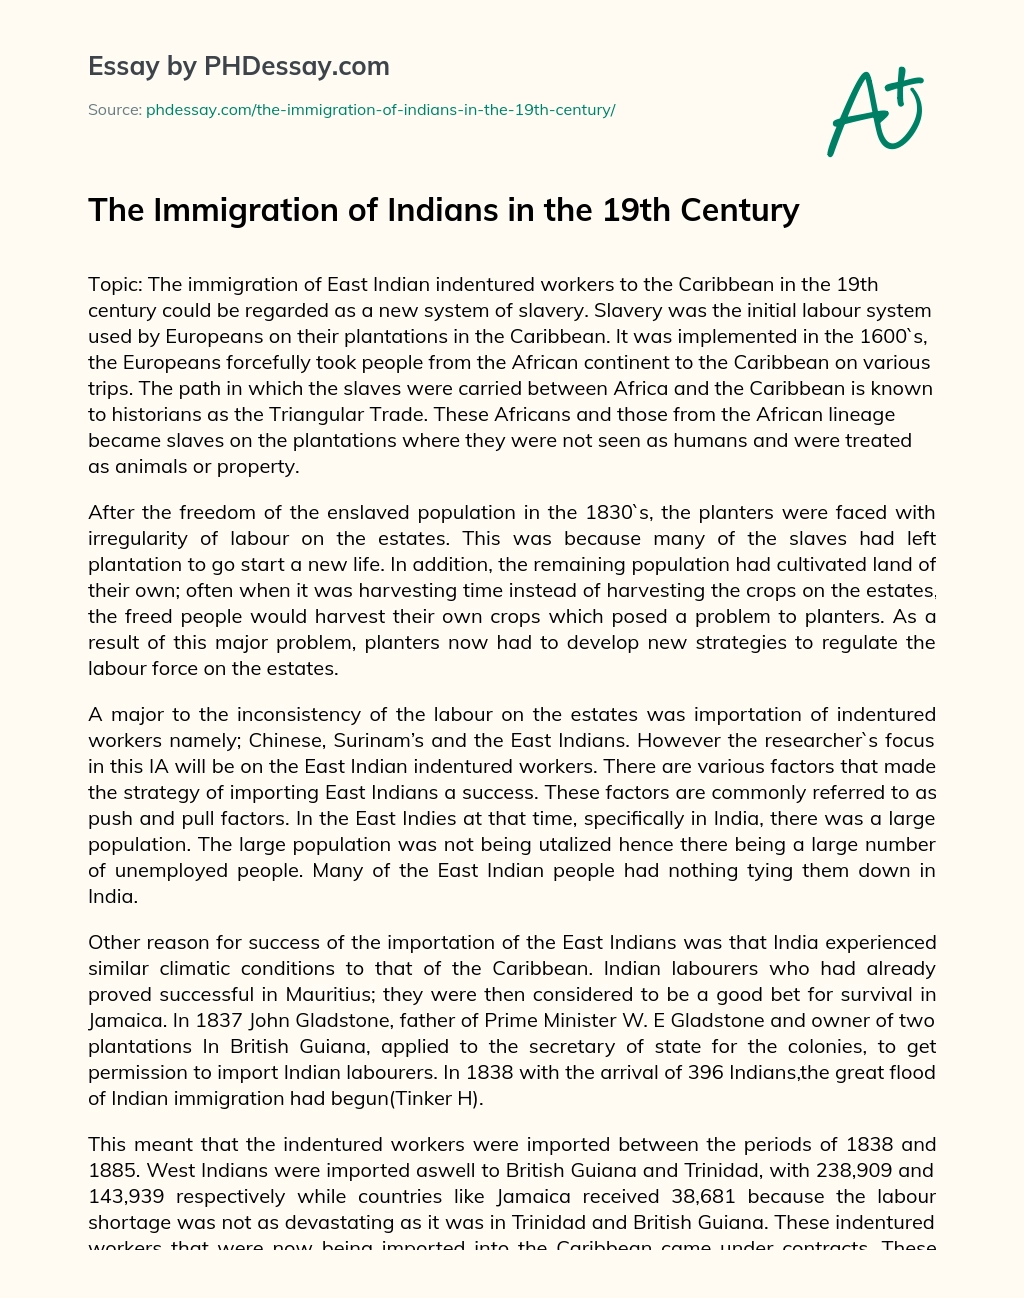 The Immigration of Indians in the 19th Century essay